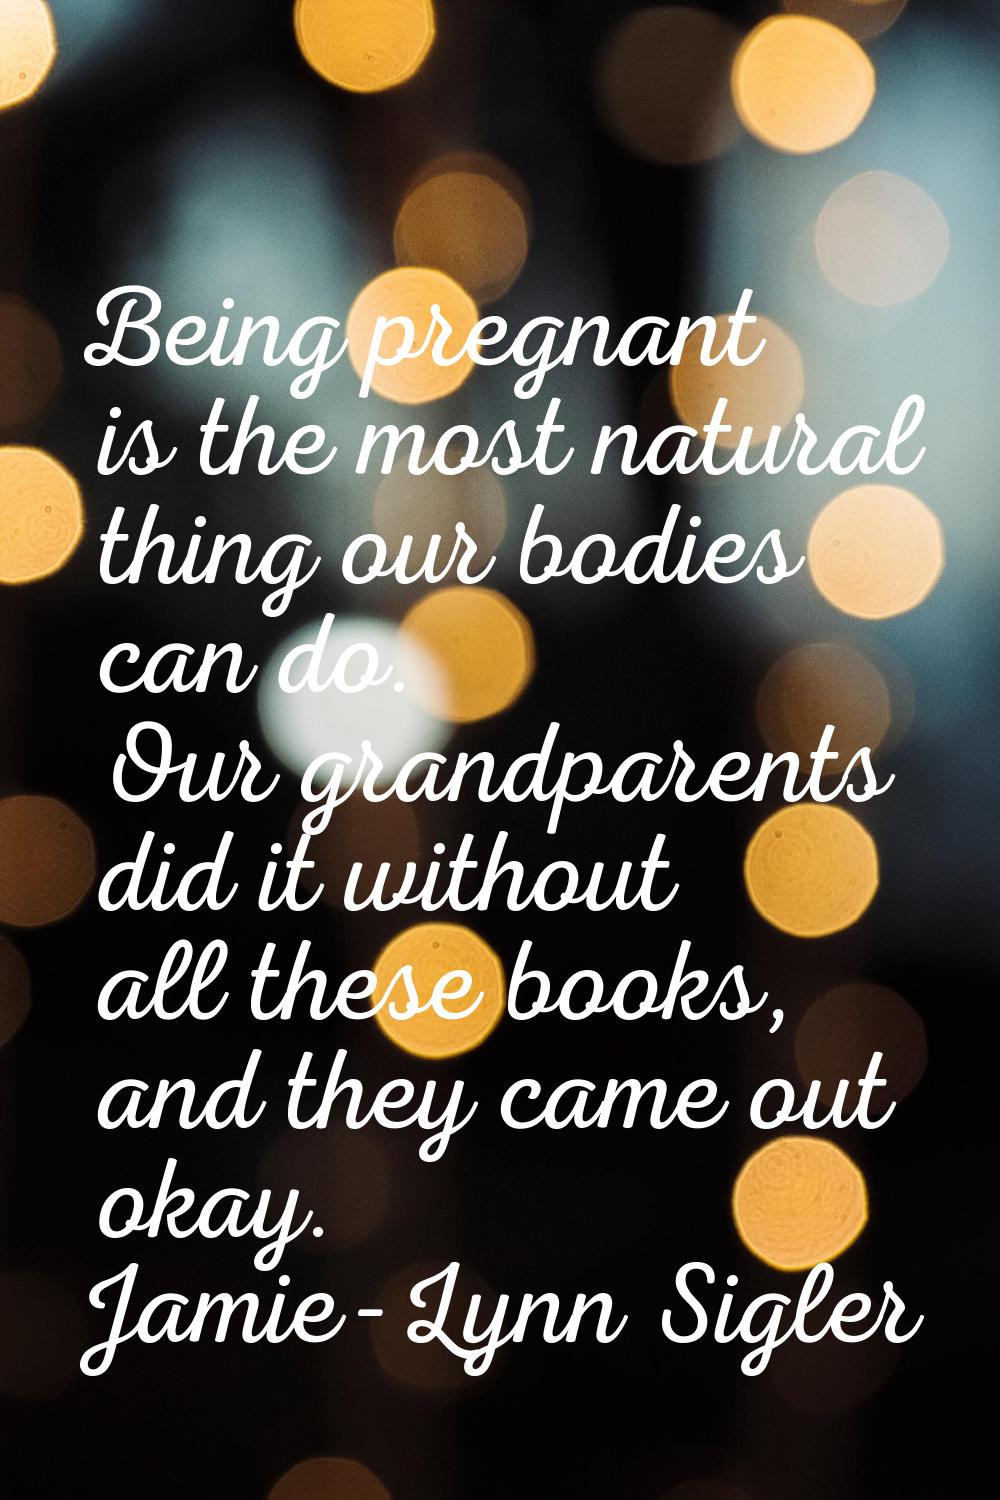 Being pregnant is the most natural thing our bodies can do. Our grandparents did it without all the